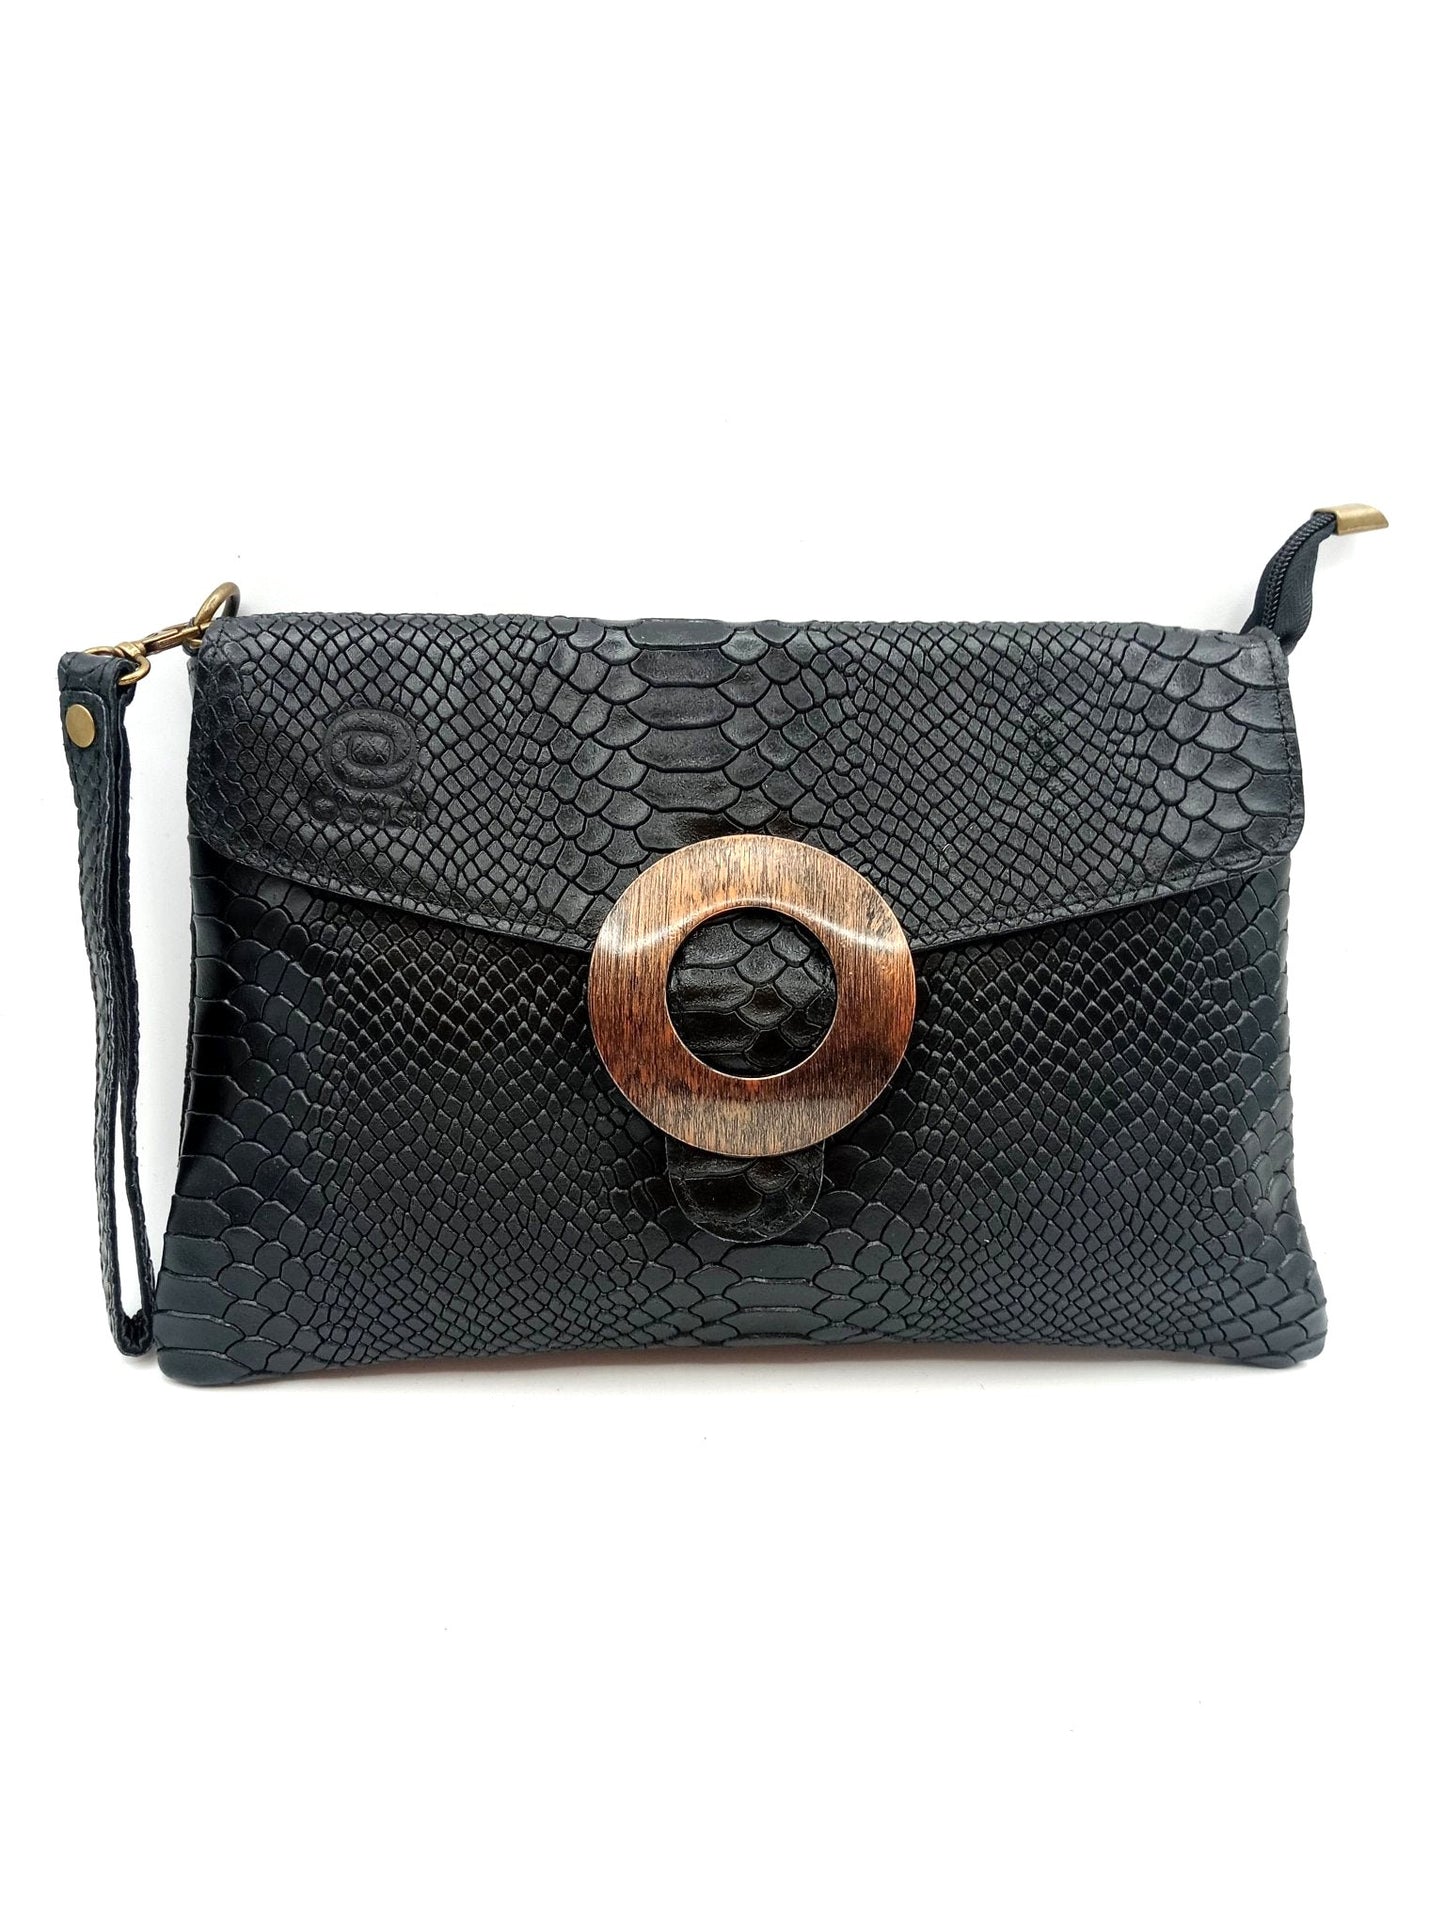 Women's leather wallet bag with Qoolst circle clasp